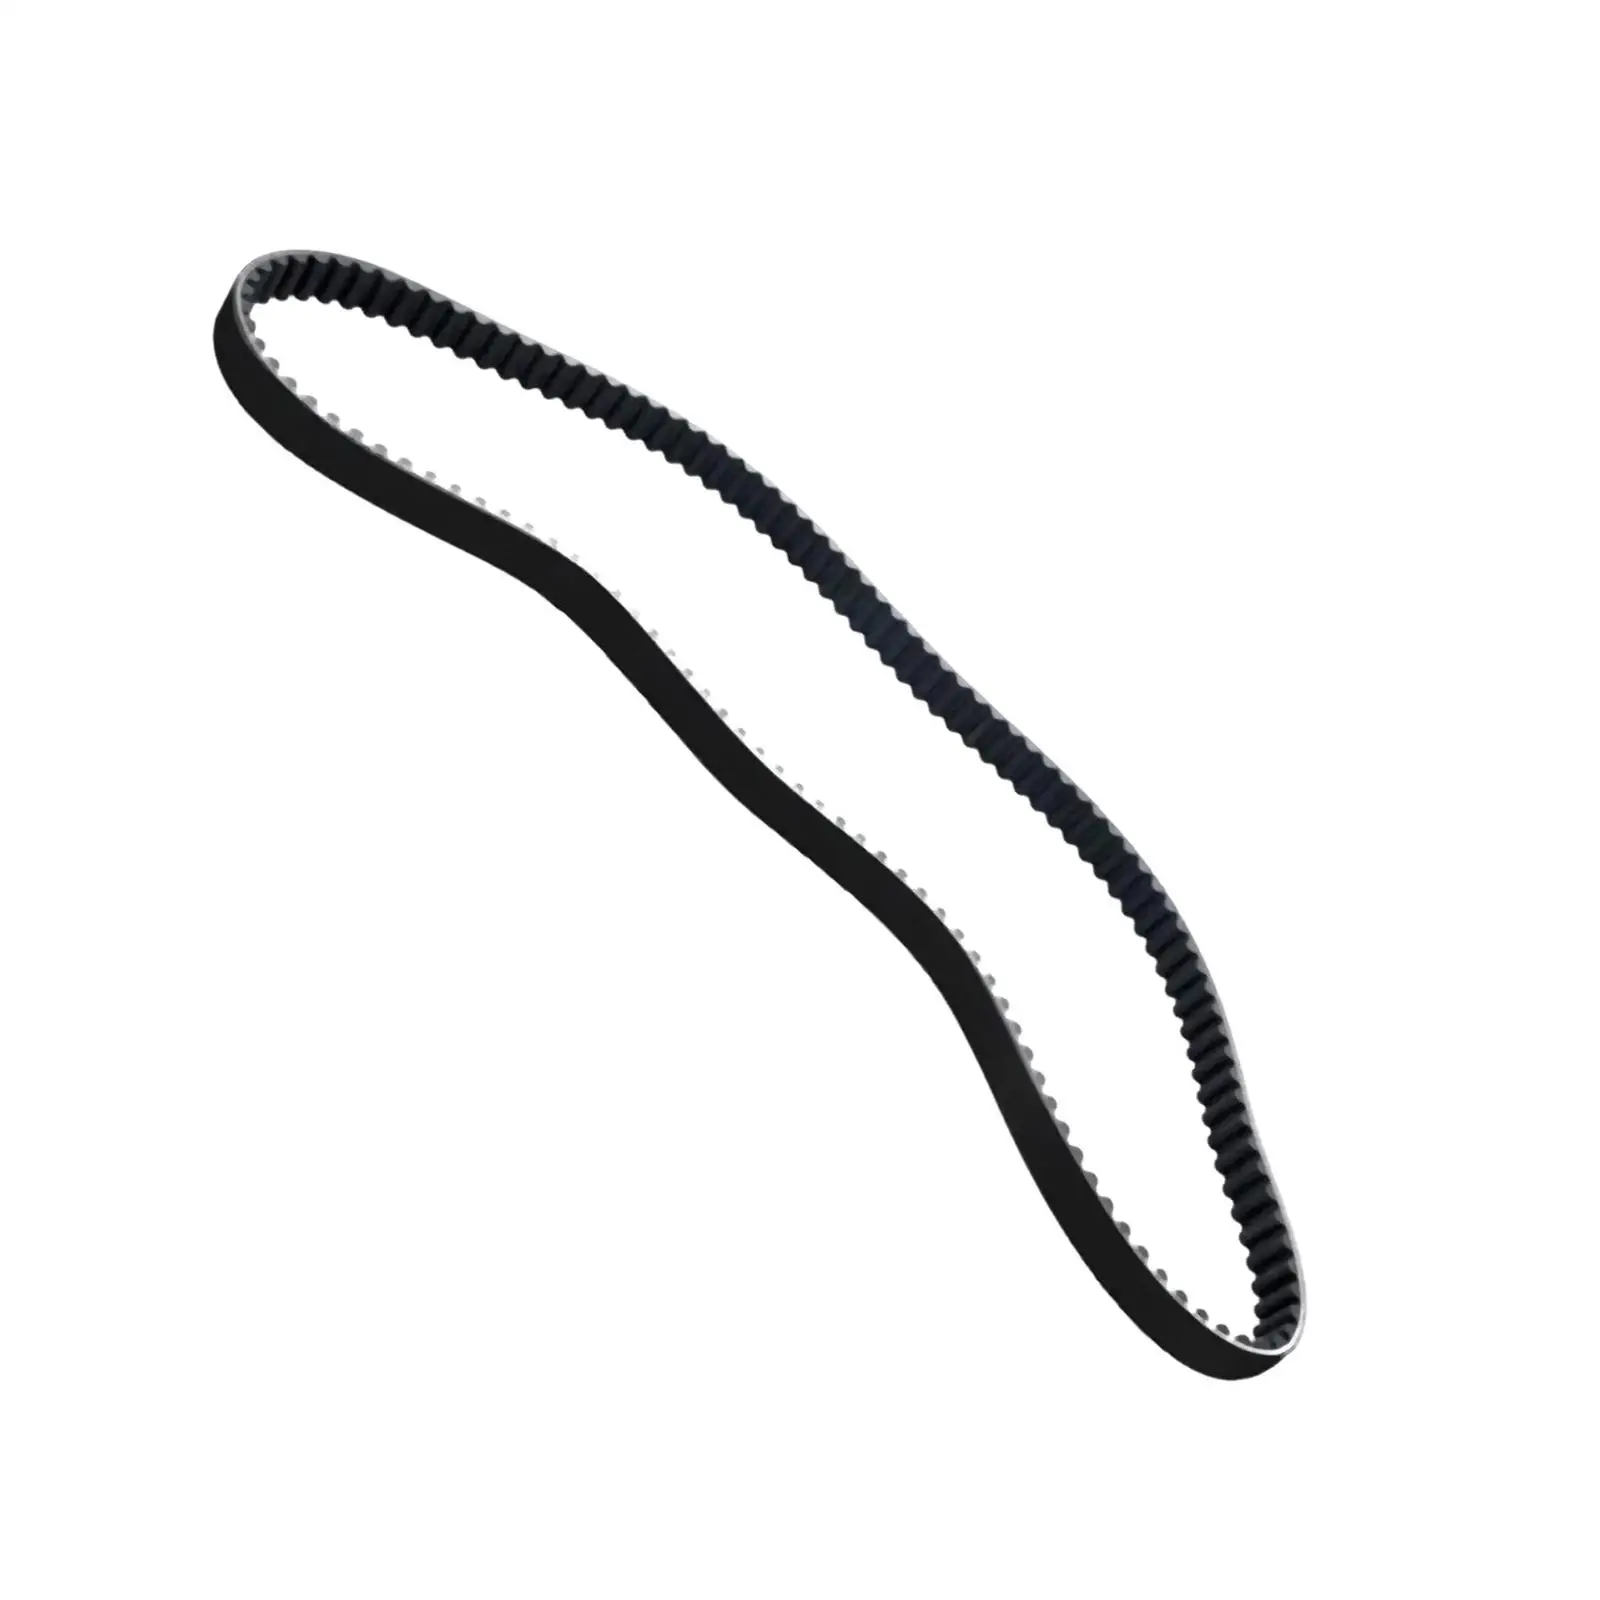 Rear Drive Belt 40001-85 Rubber Direct Replaces for Harley-davidson Touring